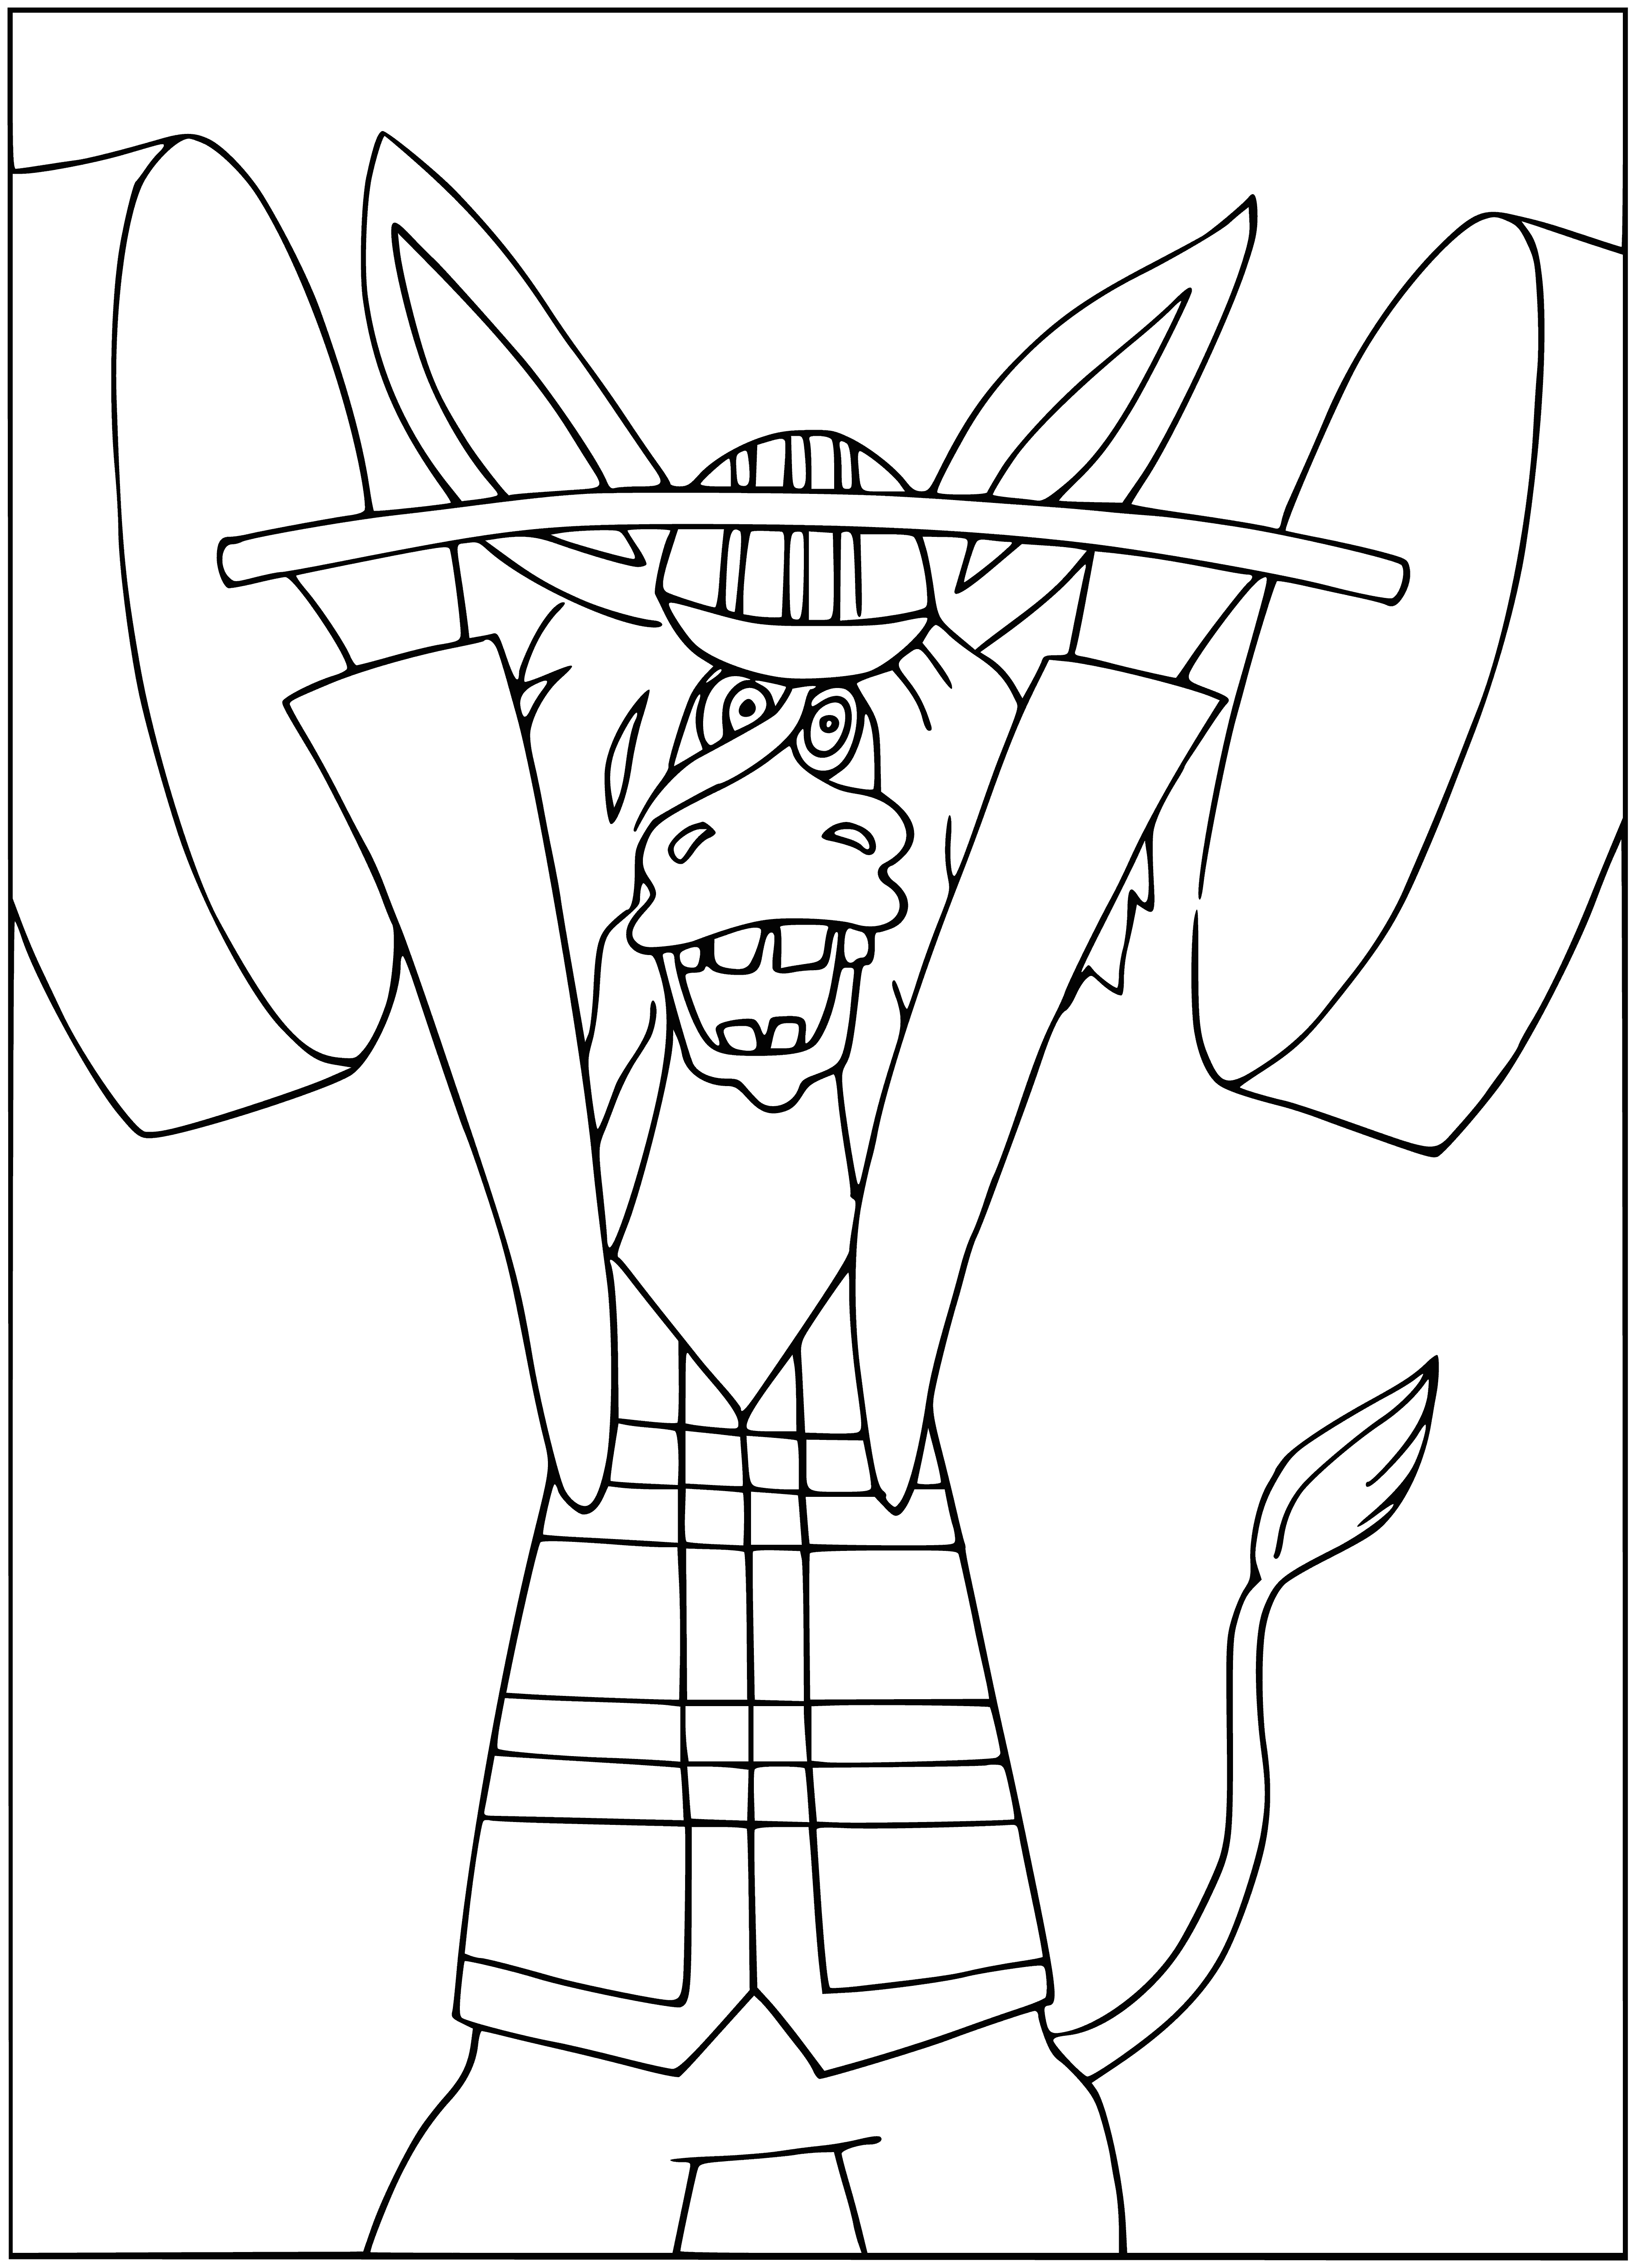 coloring page: A donkey stands in a rural setting, long ears, black mane/tail, light brown coat, wearing a bridle with metal bit.